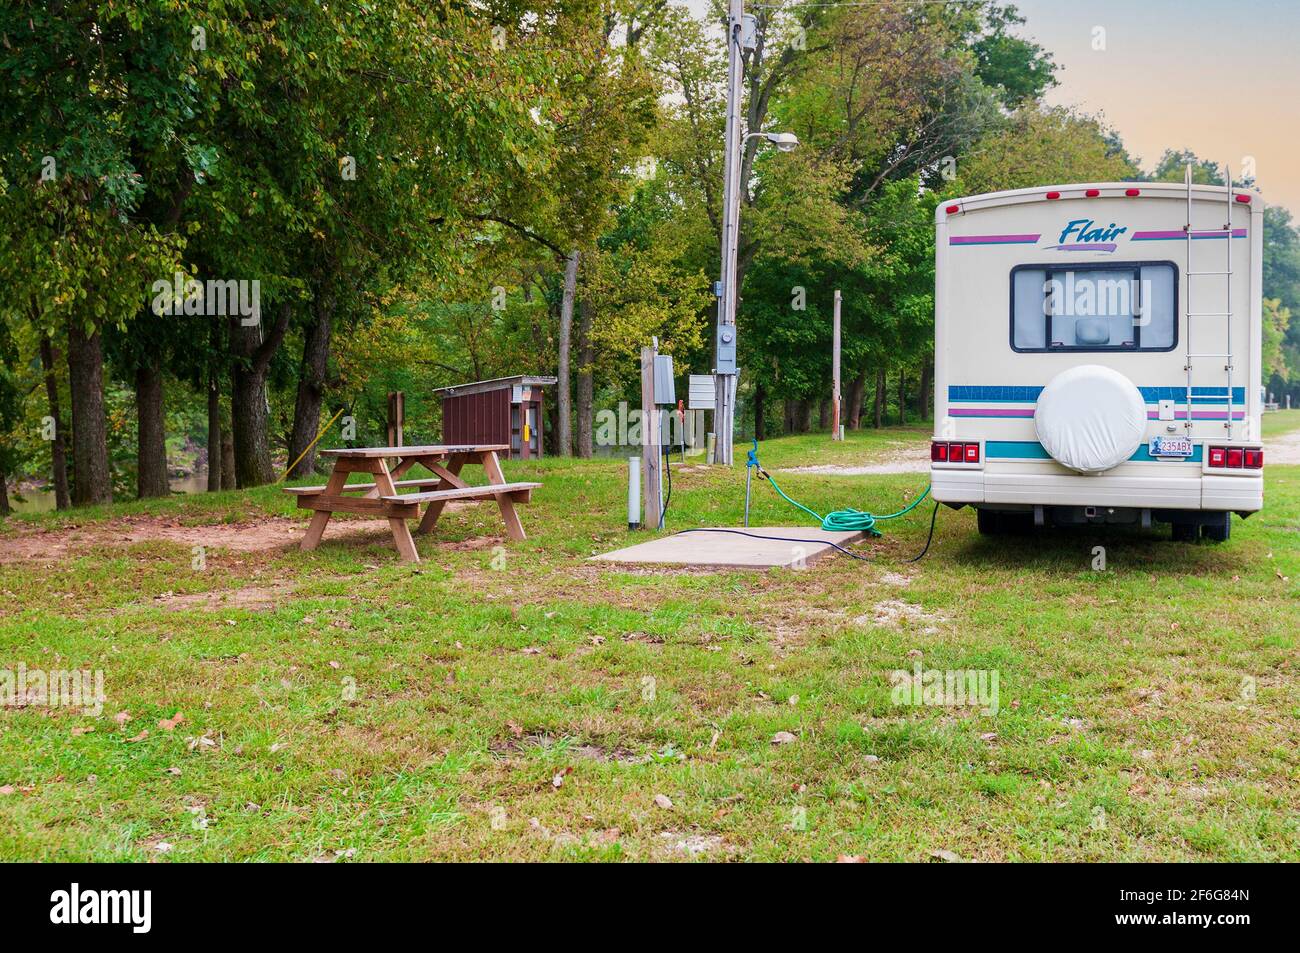 An older class A Flair RV camper van motor home parked at a campsite with water & electrical hookups and a picnic table. USA Stock Photo